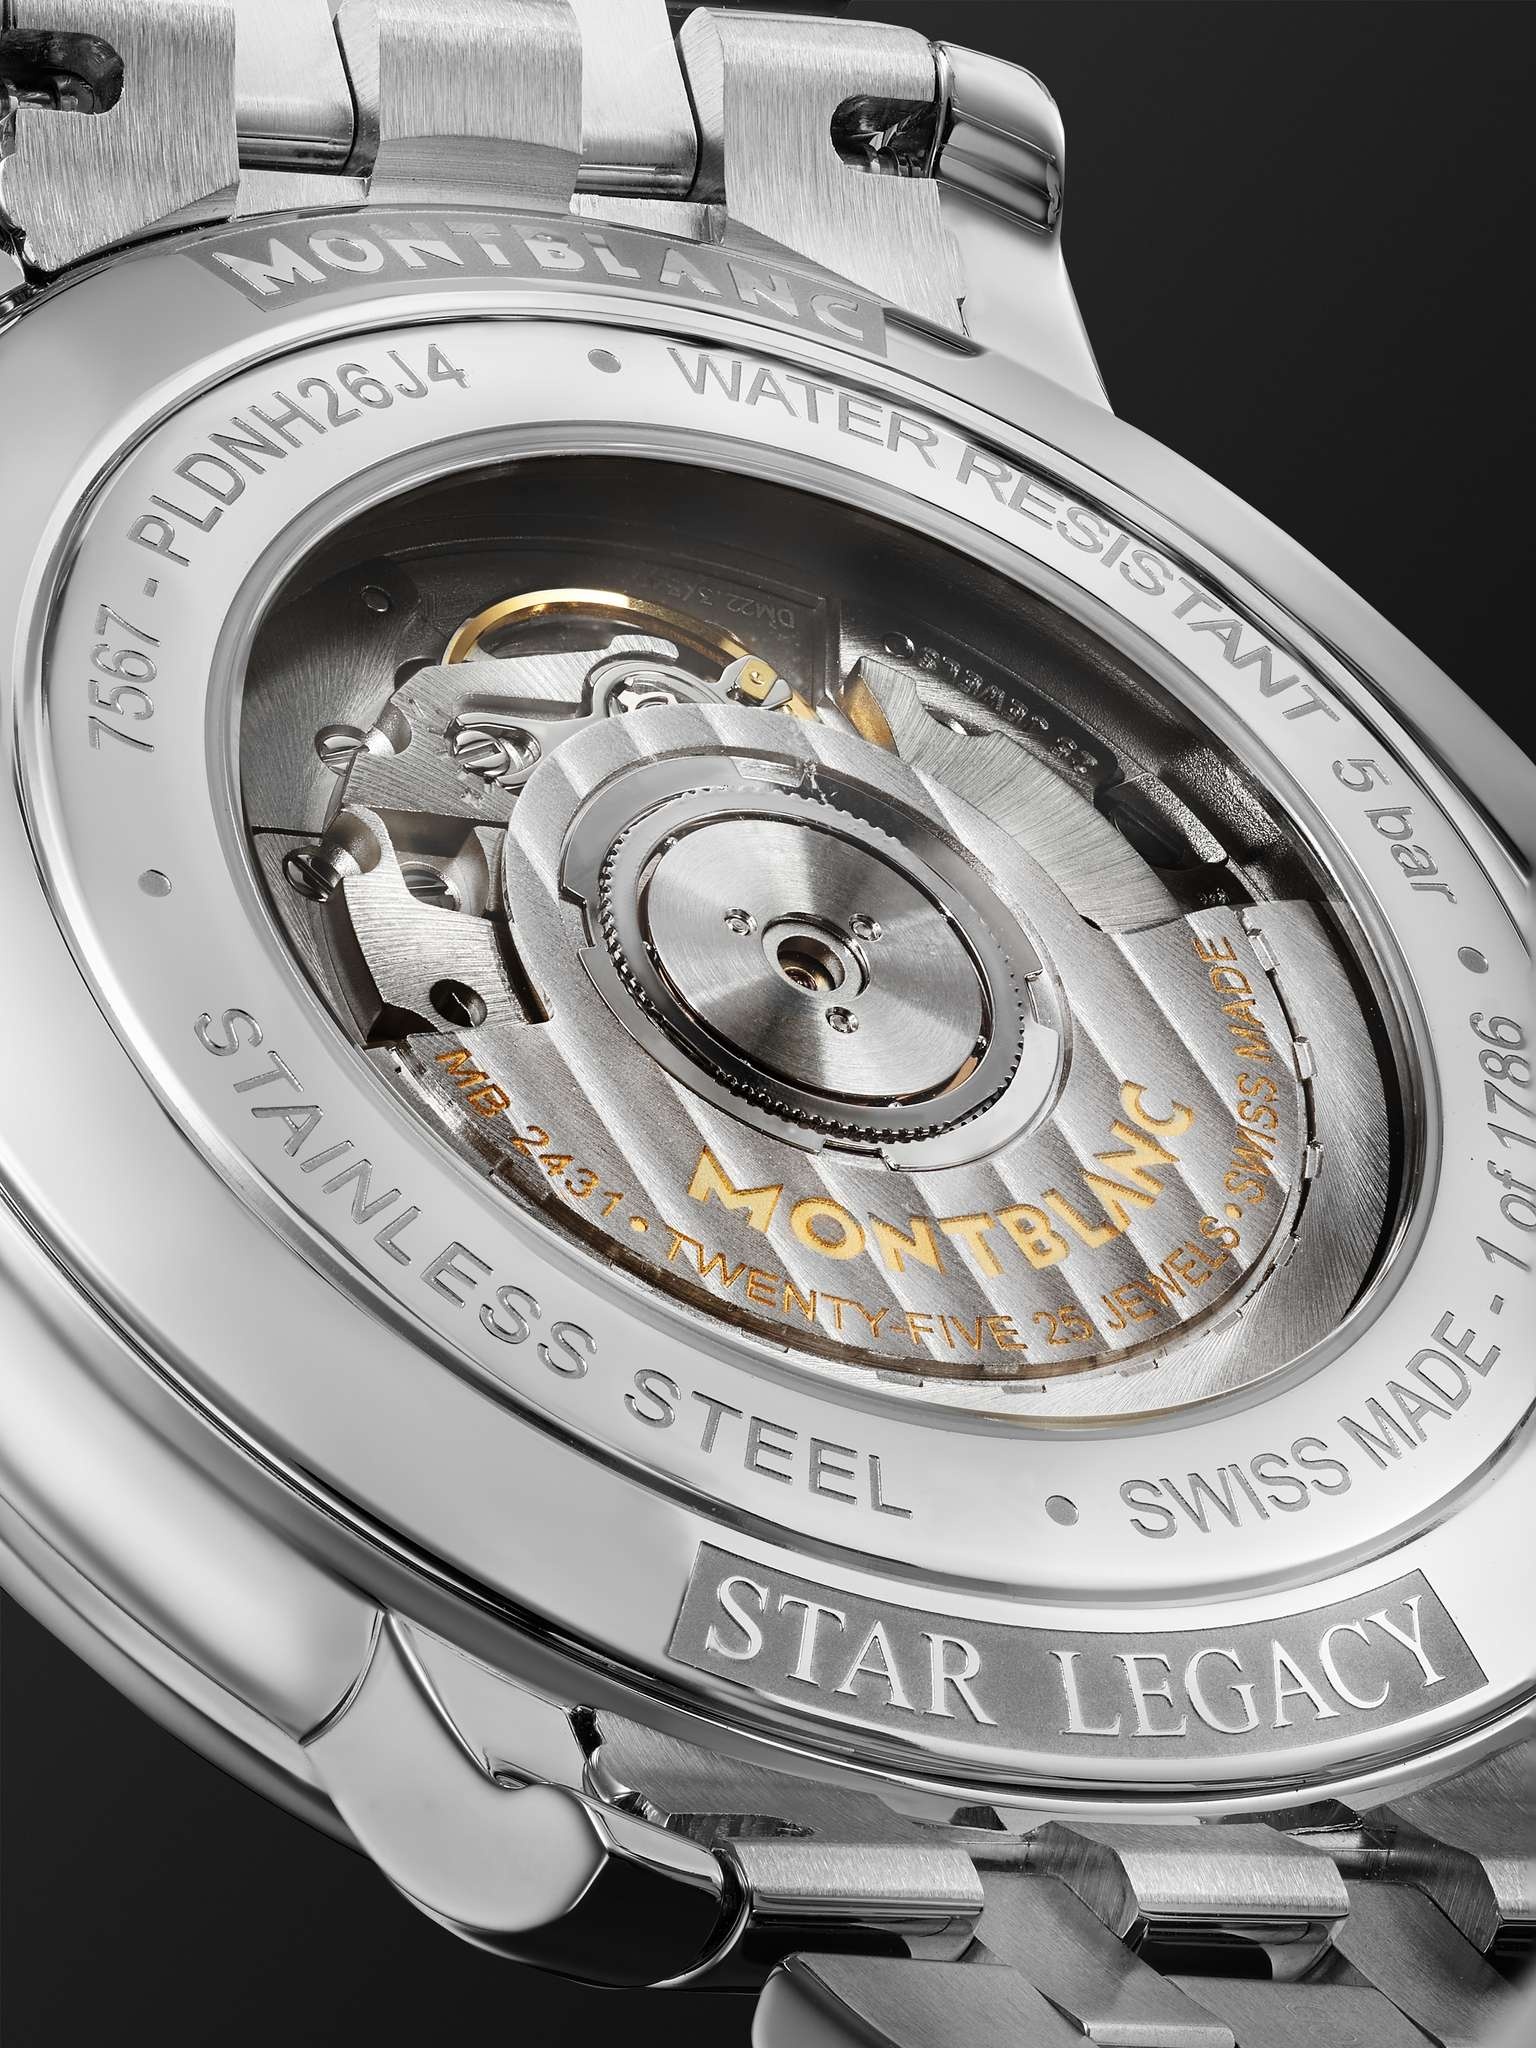 Star Legacy Limited Edition Automatic Moon-Phase 42mm Stainless Steel Watch, Ref. No. MB129631 - 4